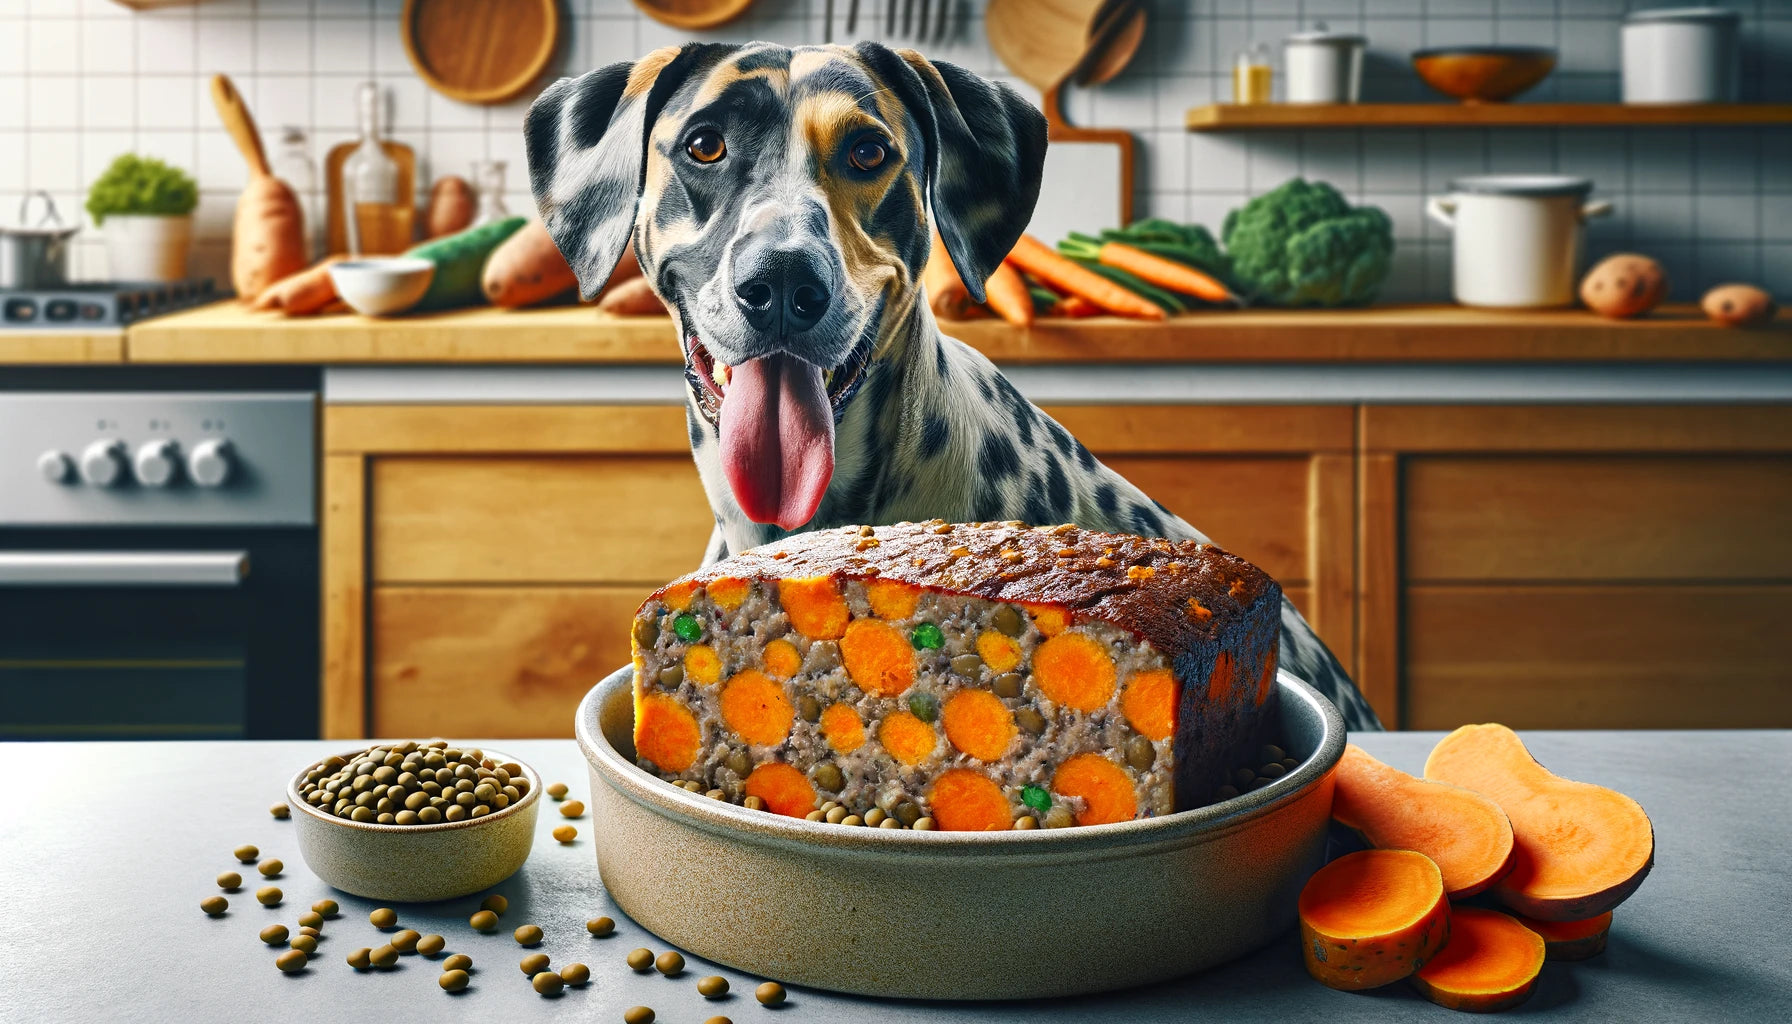 Sweet Potato and Lentil Loaf in a dog's bowl with a Catahoula Leopard Dog sitting next to it, tongue out as if panting.